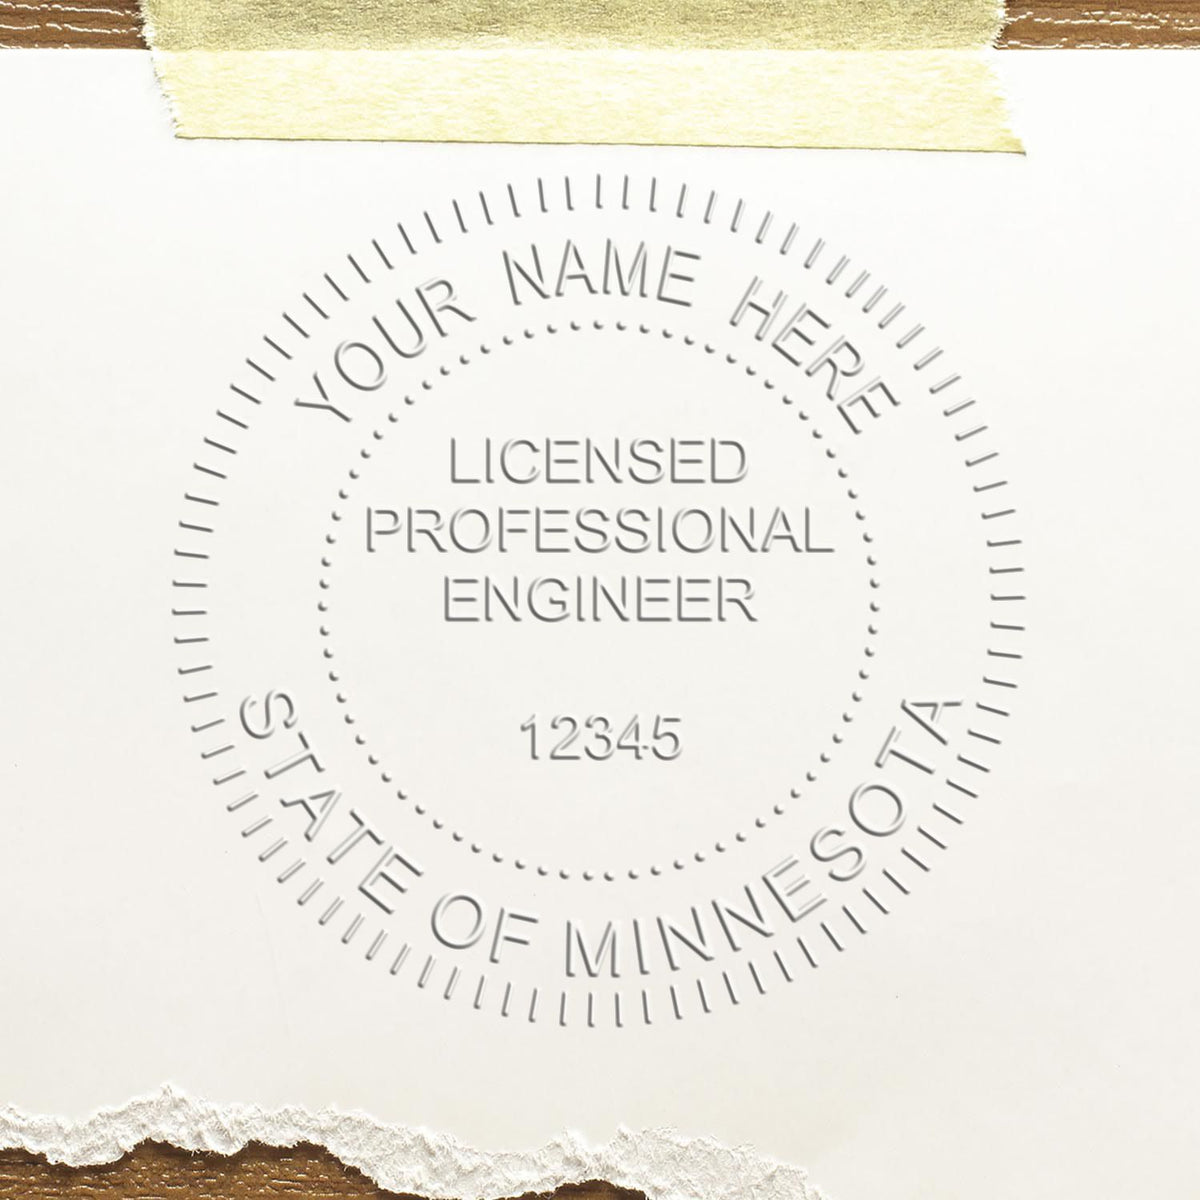 A photograph of the Soft Minnesota Professional Engineer Seal stamp impression reveals a vivid, professional image of the on paper.